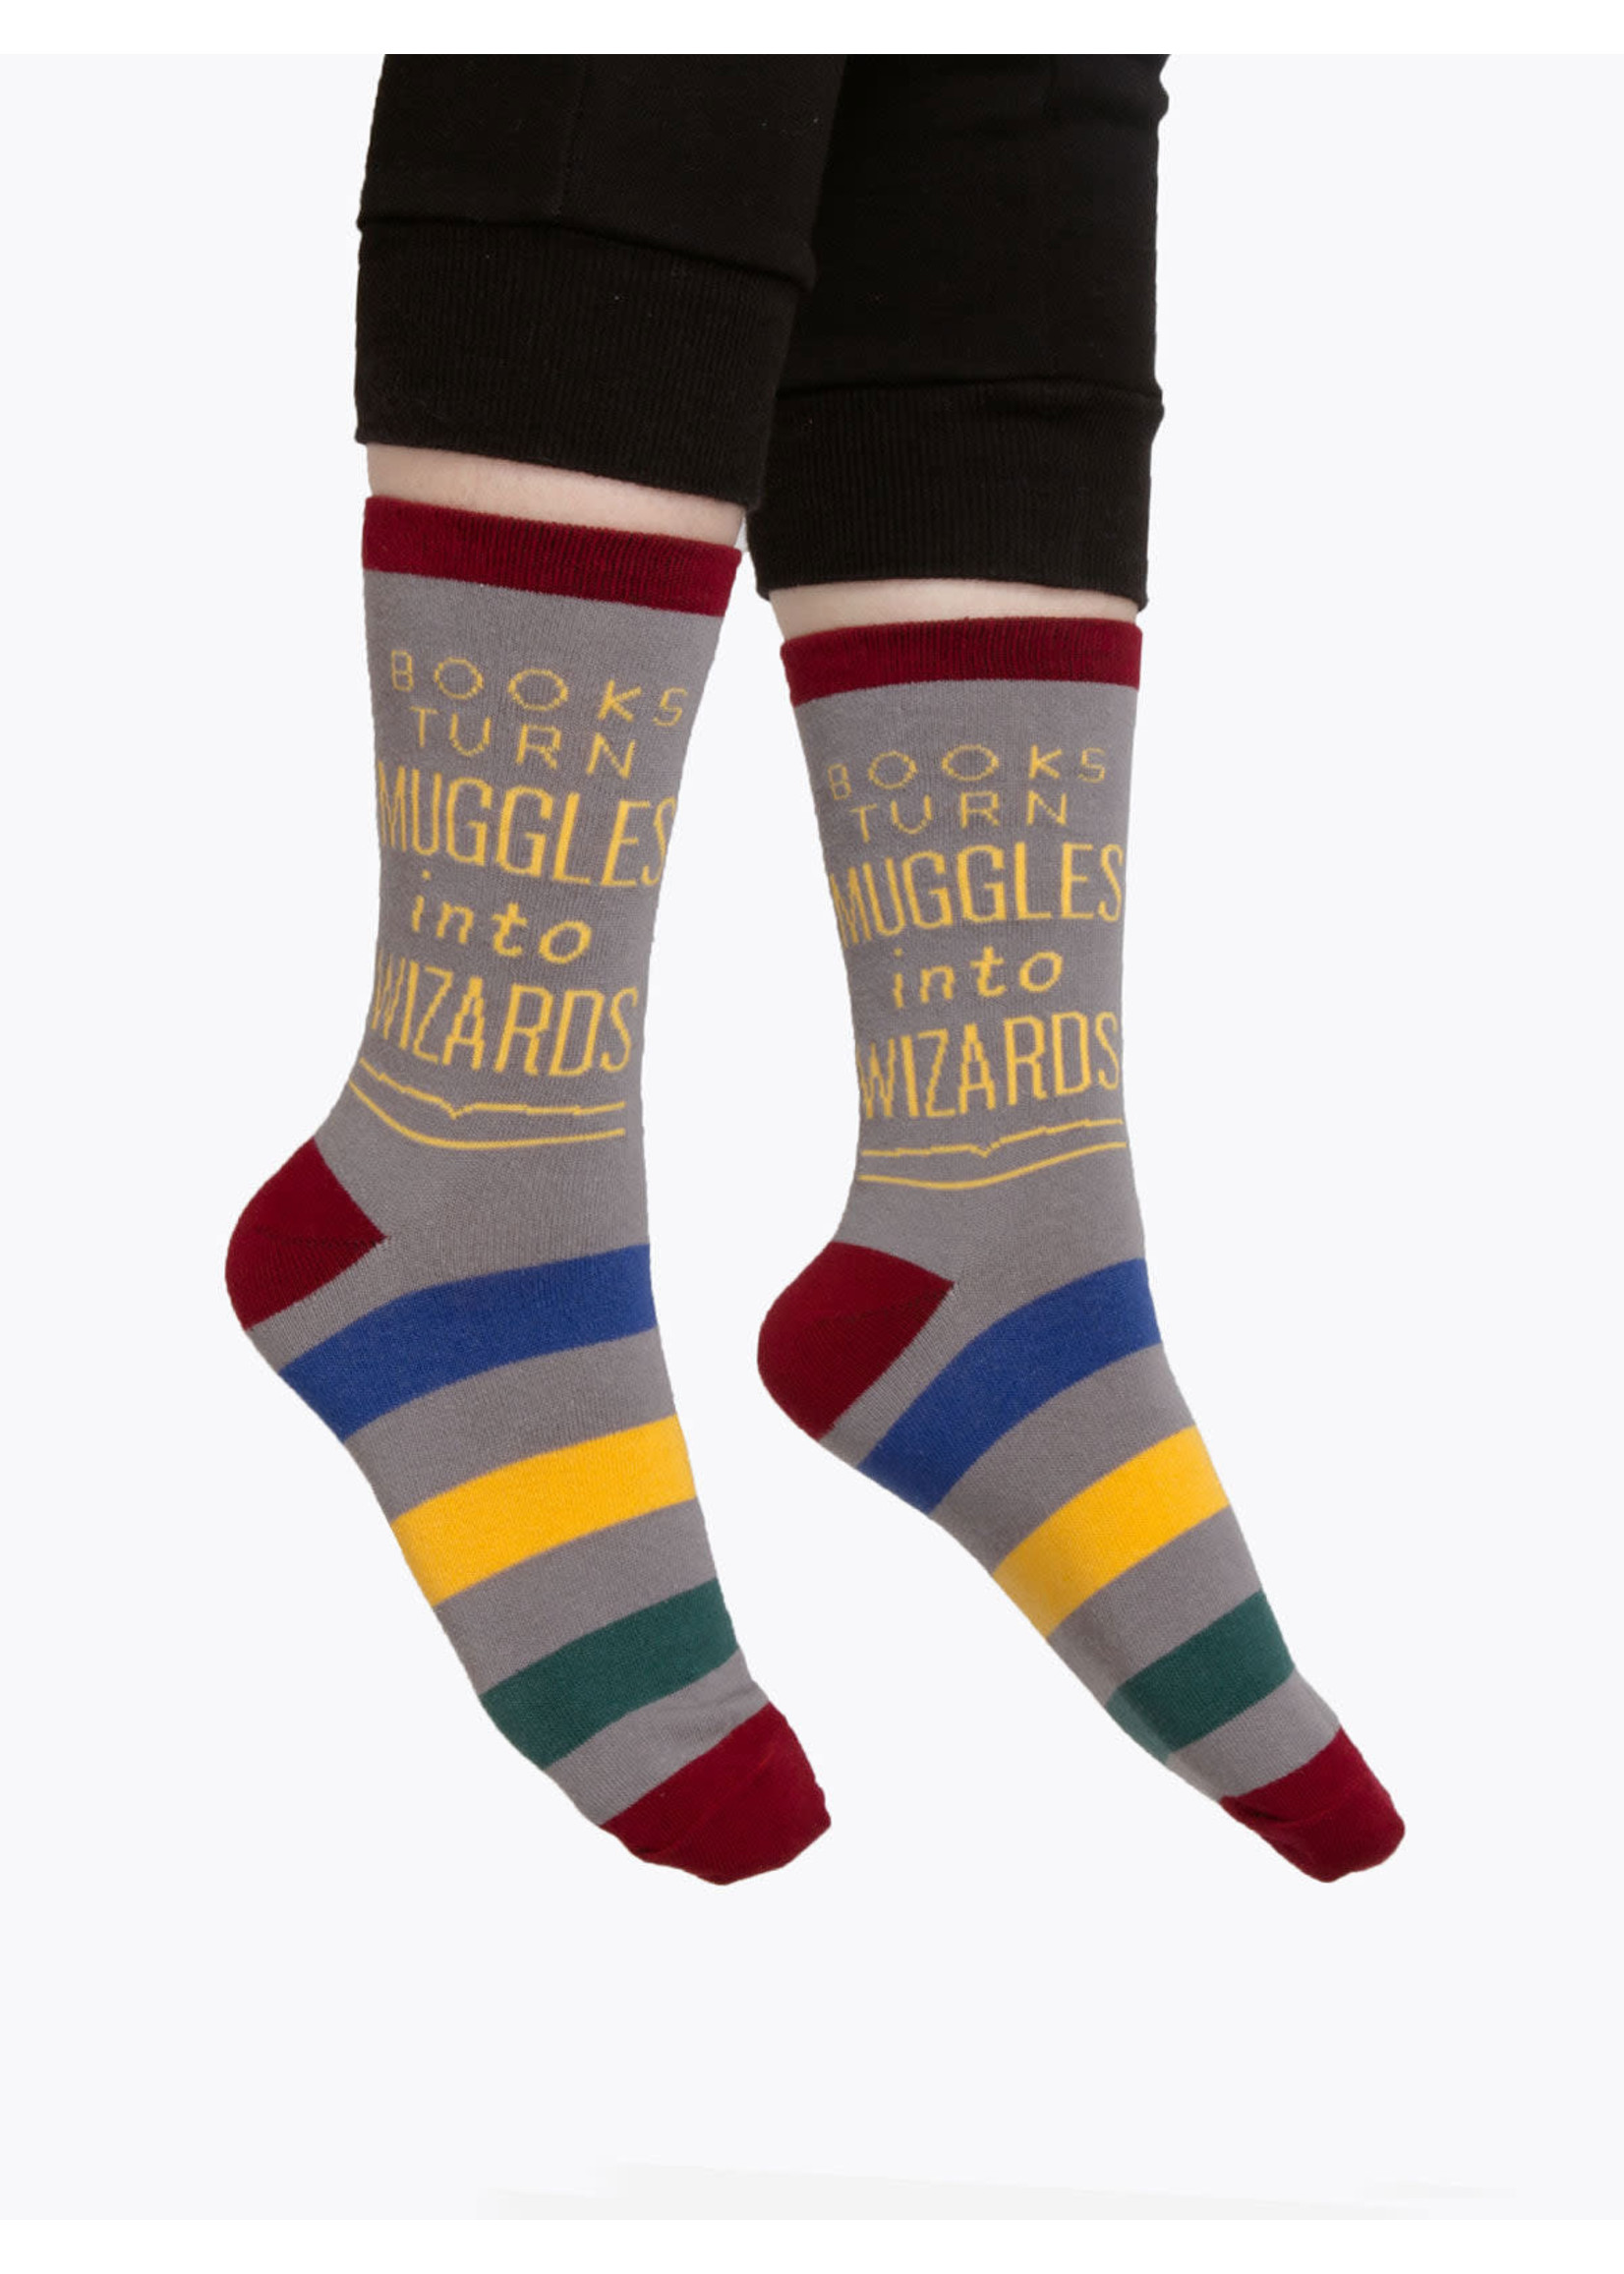 Out of Print Books Turn Muggles Into Wizards Socks